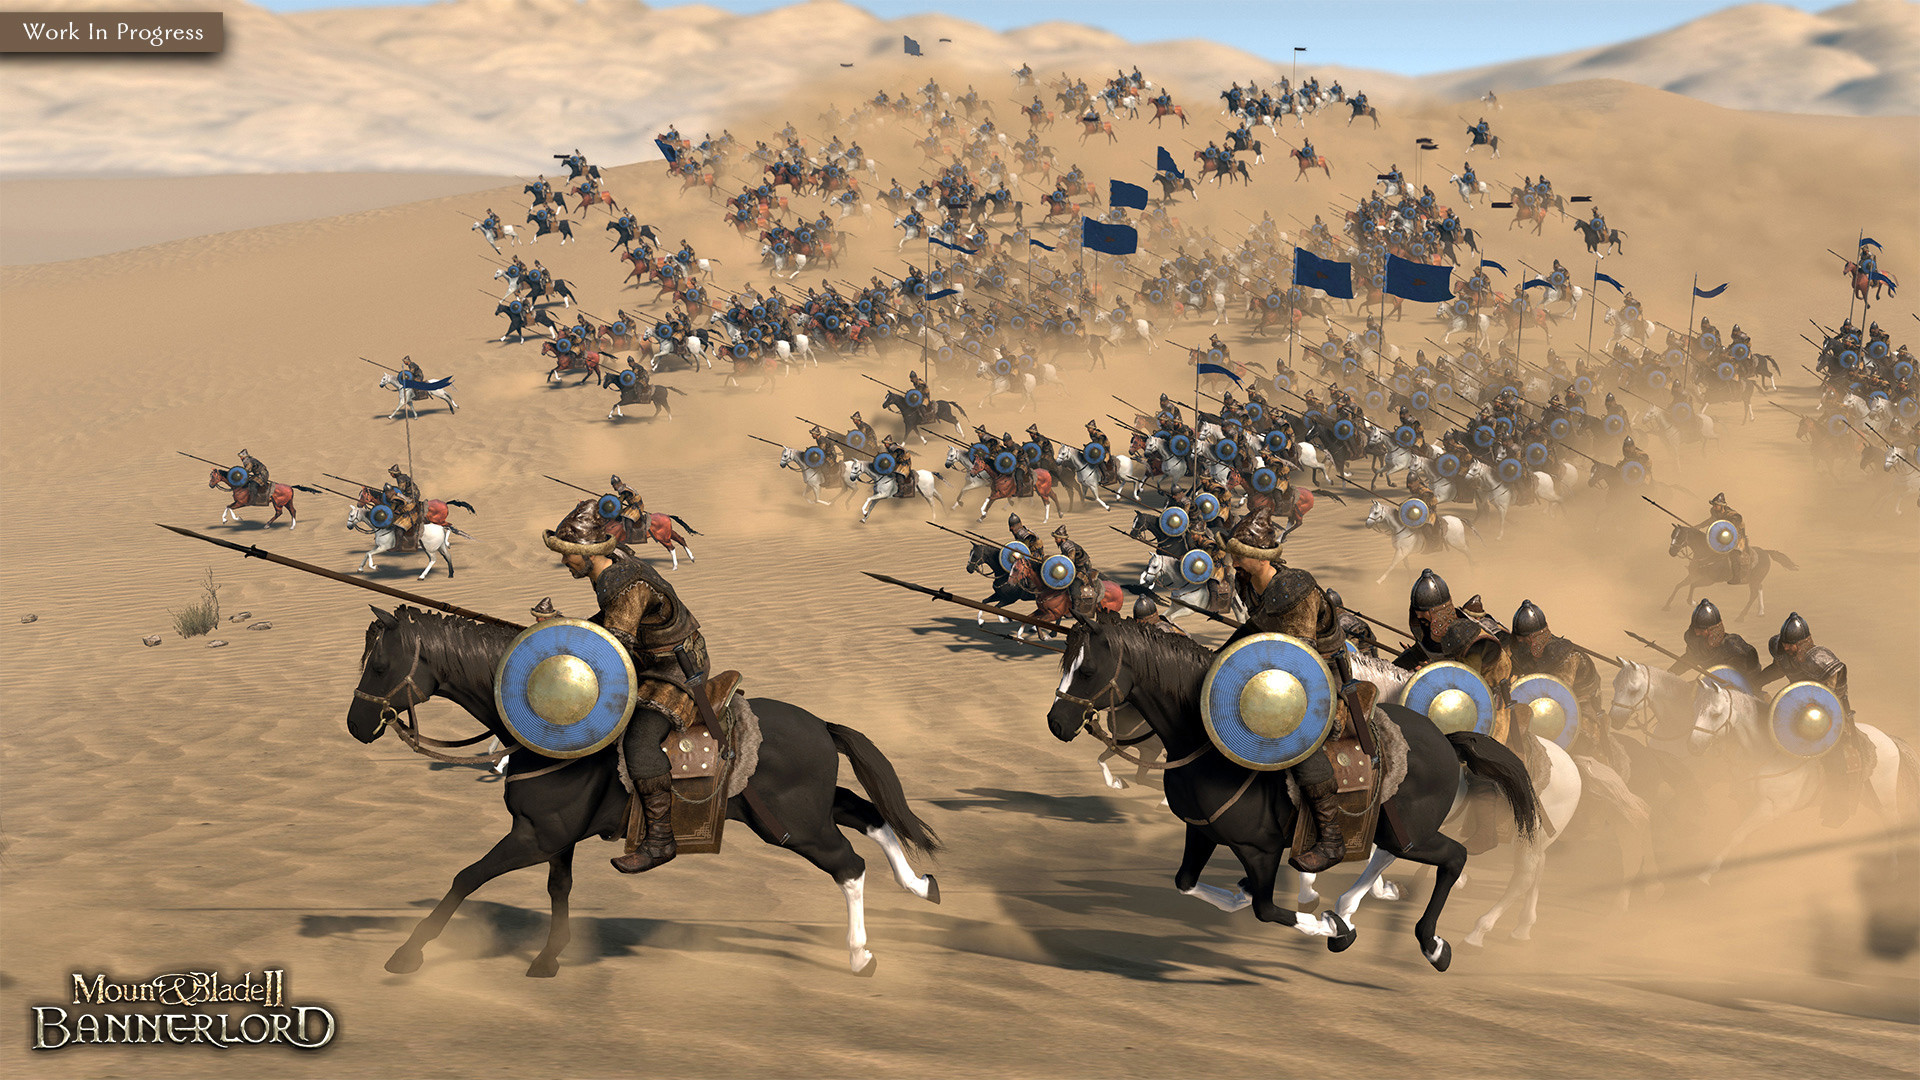 Save 10% on Mount & Blade II: Bannerlord on Steam